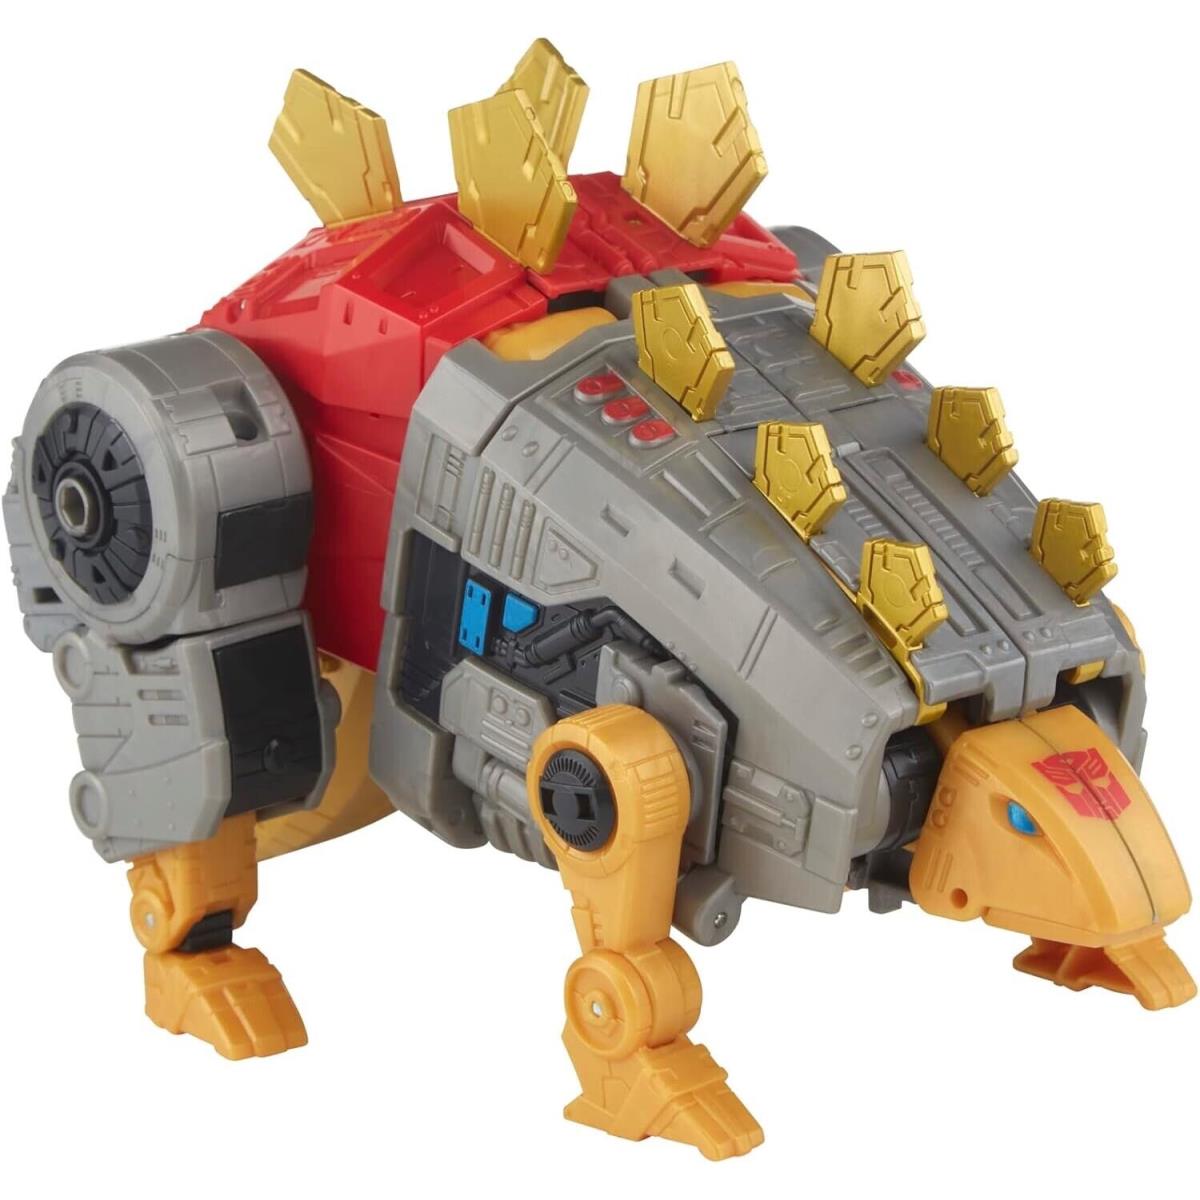 Transformers Toys Studio Series Leader Class 86-19 Dinobot Snarl Toy 8.5-inch